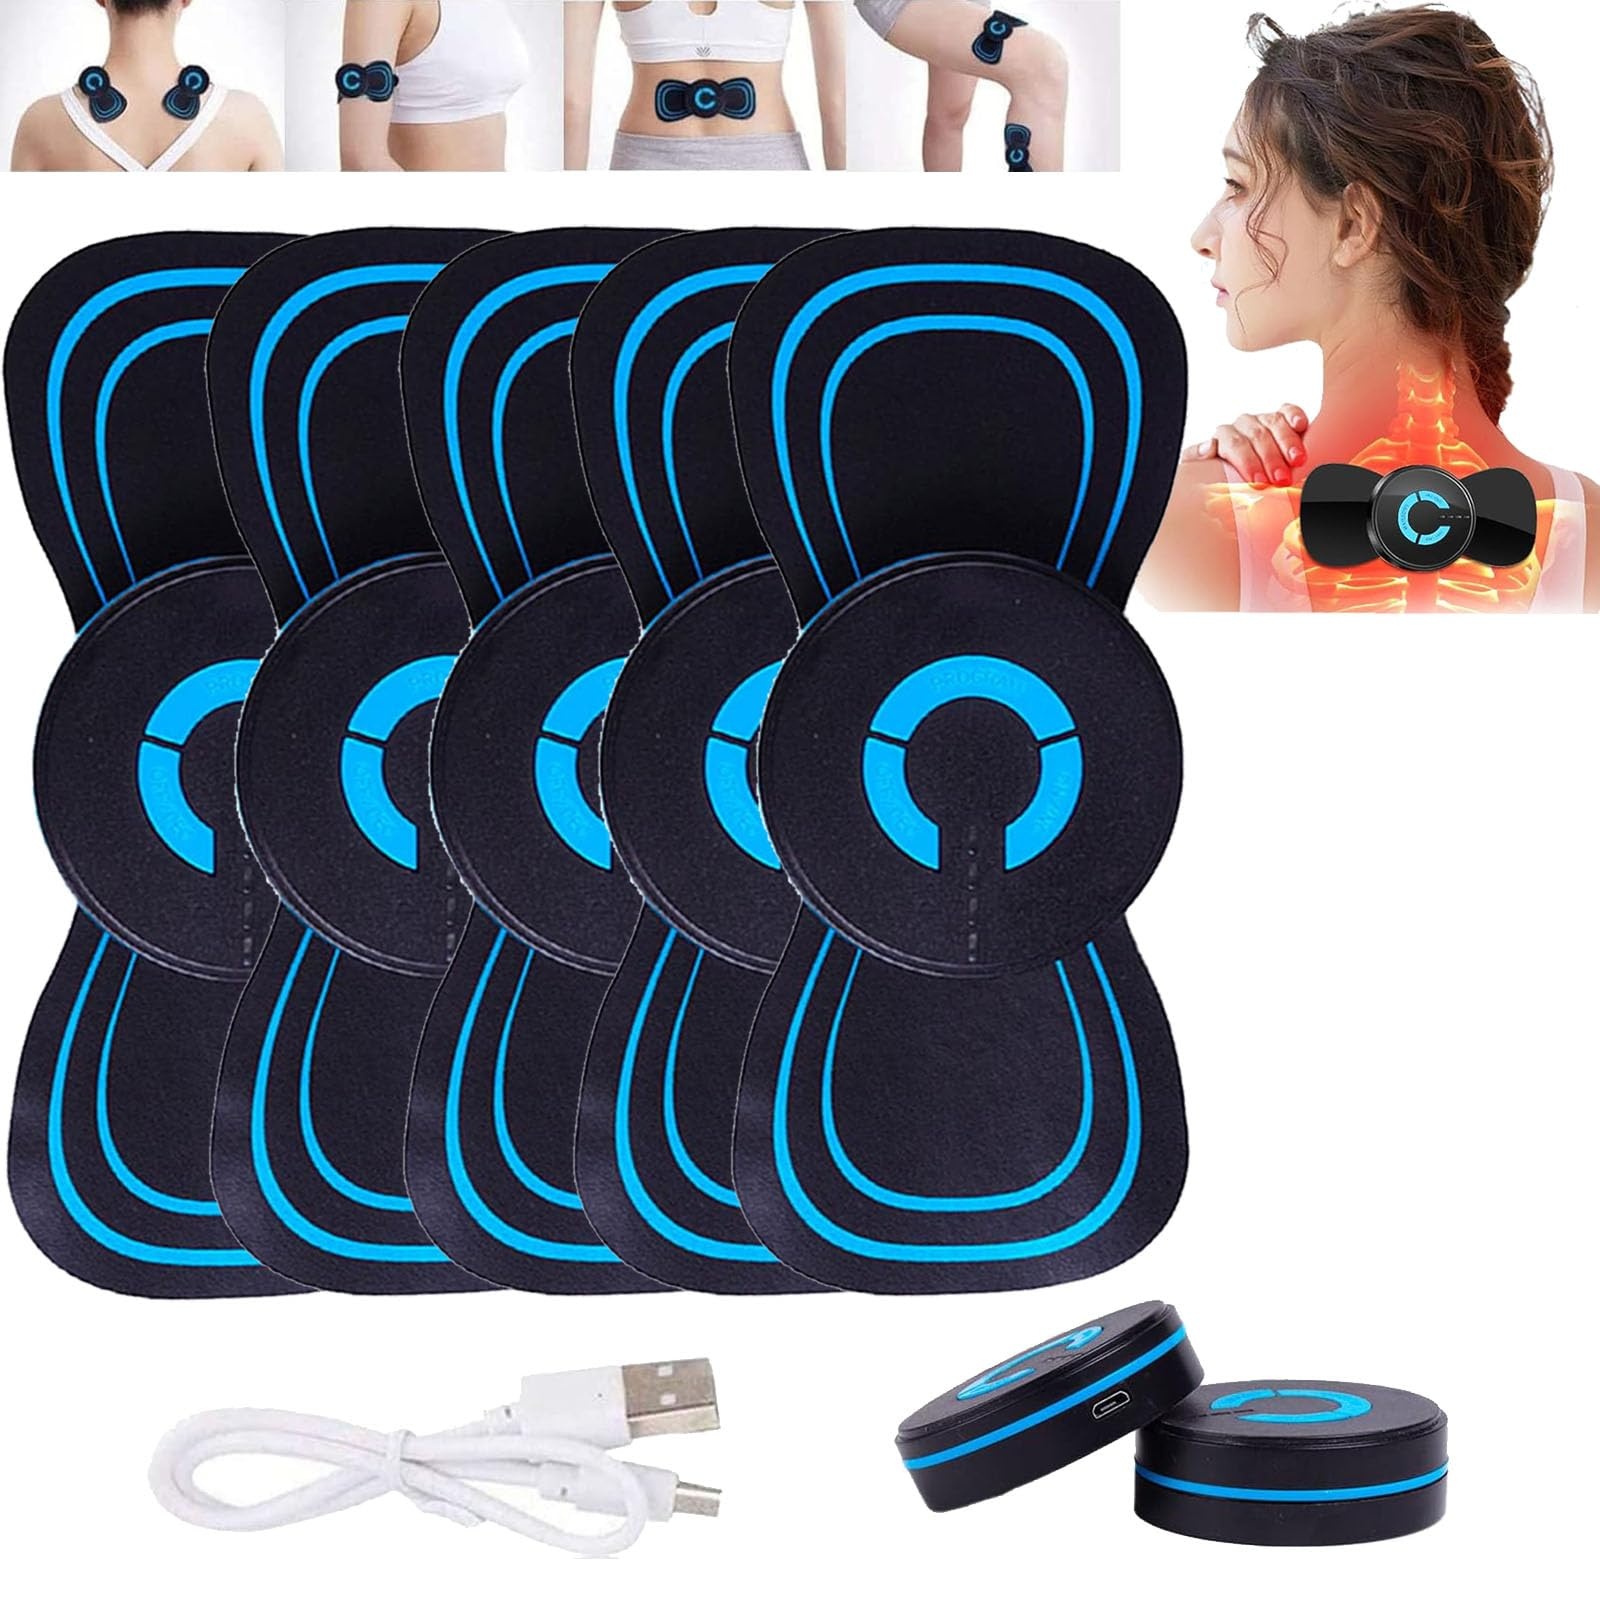 Cozyk NMES Whole Body Massagers, Portable Whole Body Massager, Massager Patch for Whole Body, Dual Neck Back Massager for Dynamic Fitness Workout Gear (5PCS)